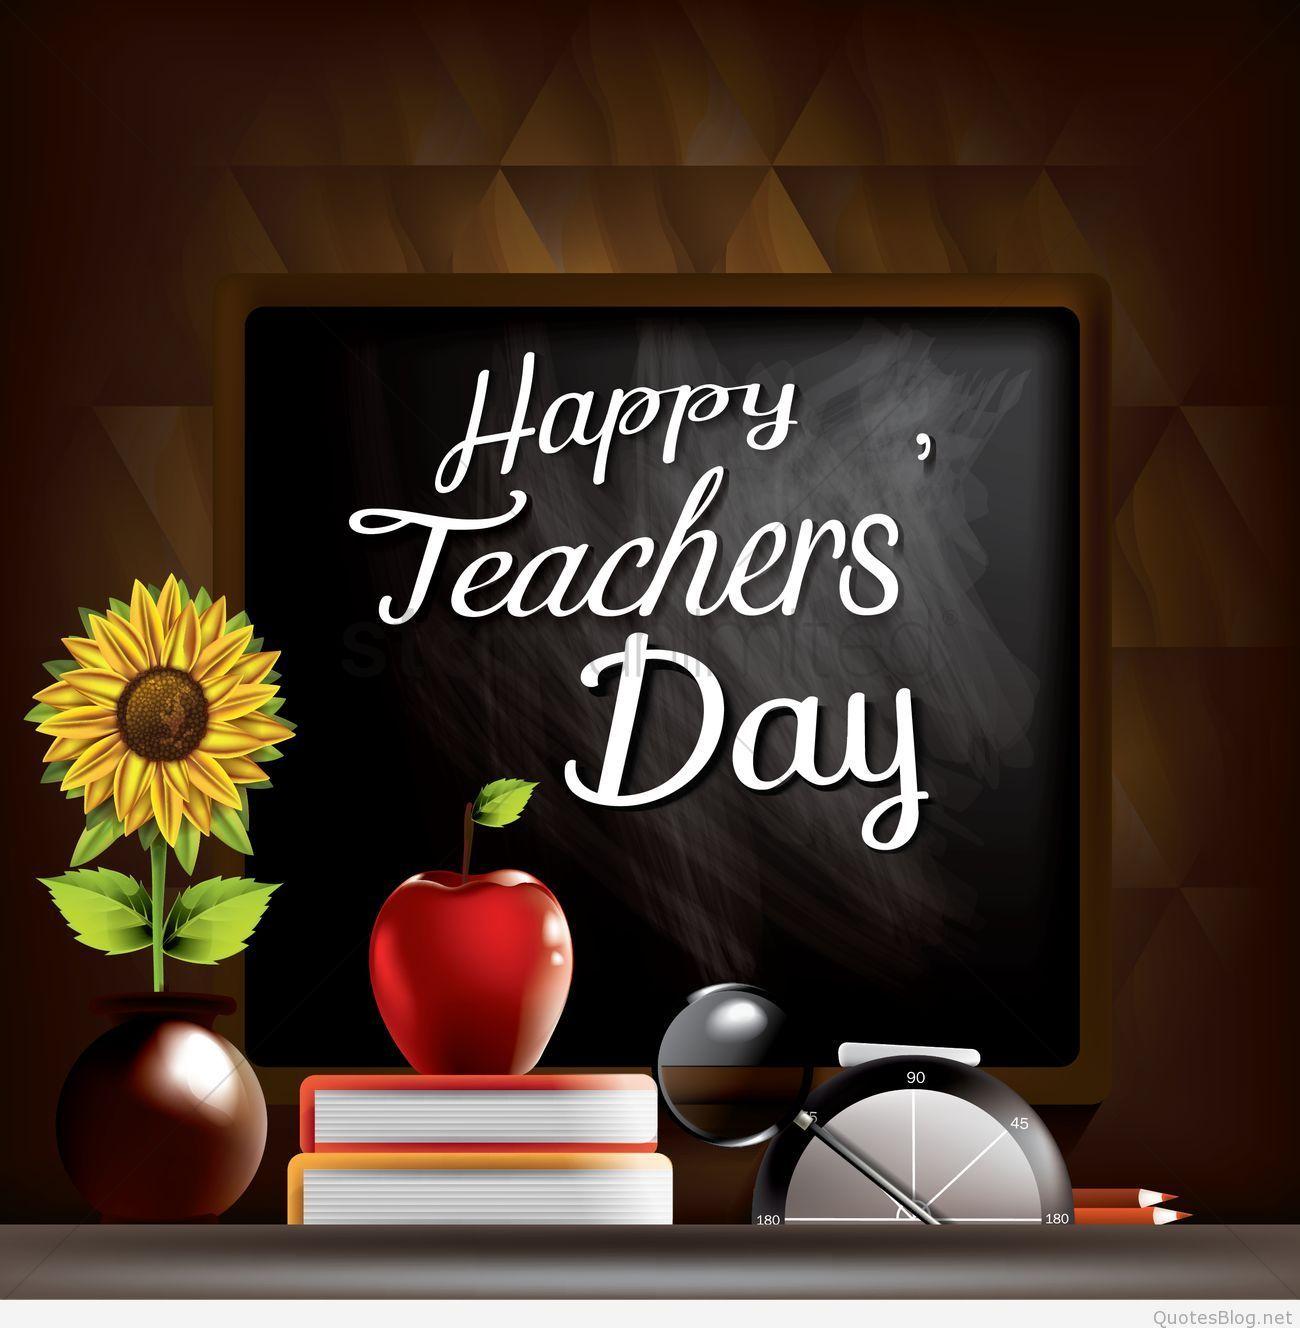 Happy Teacher's Day Picture, Messages, Cards, Wallpaper, Quotes